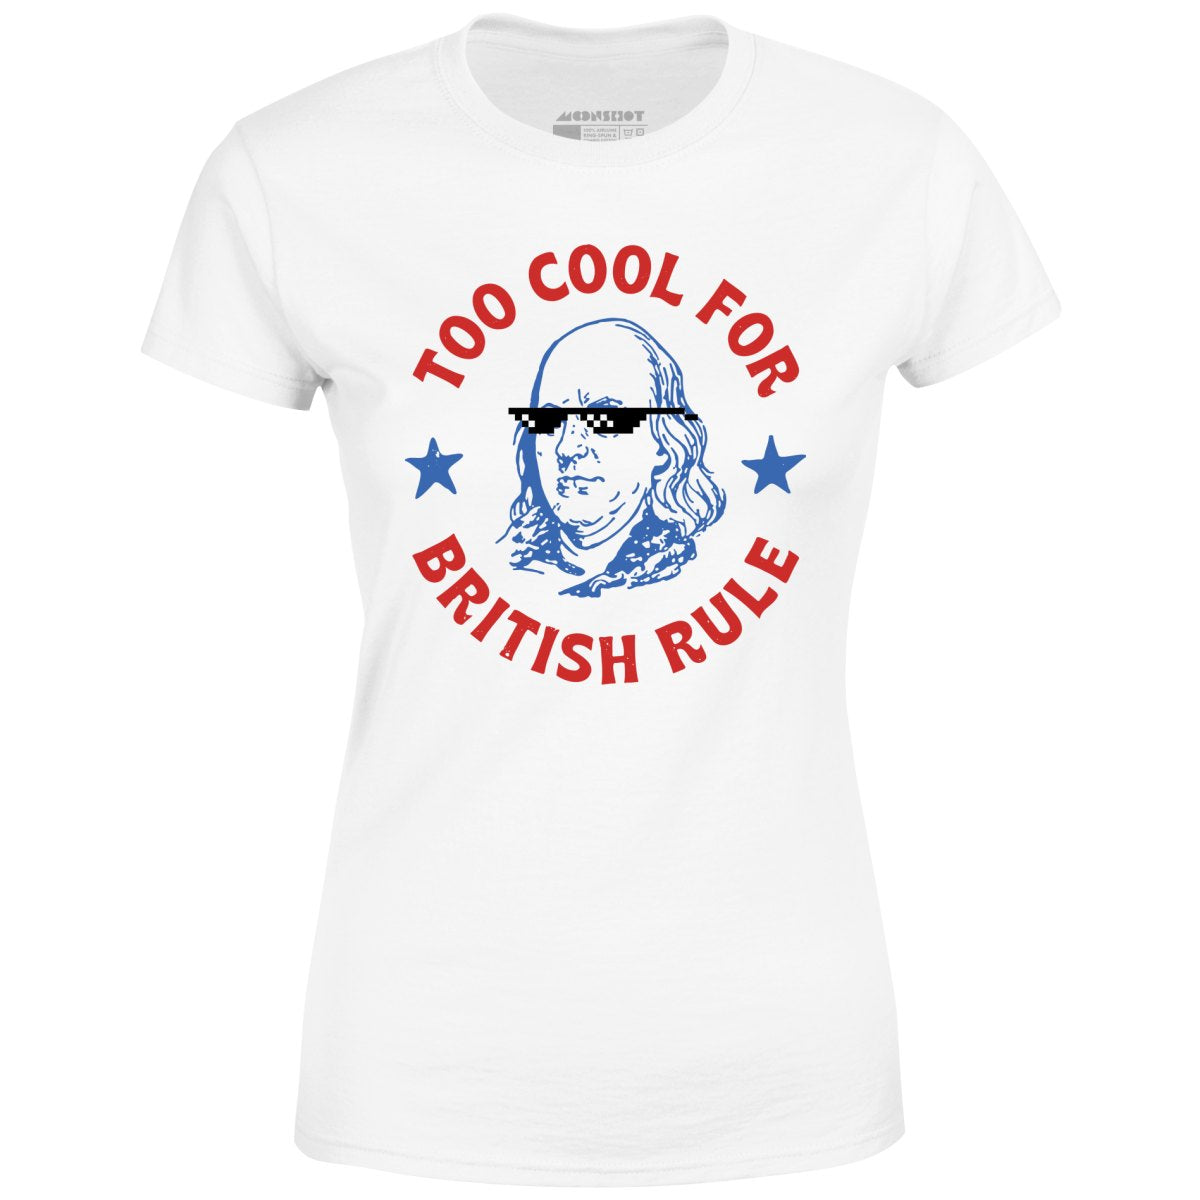 Too Cool For British Rule - Women's T-Shirt